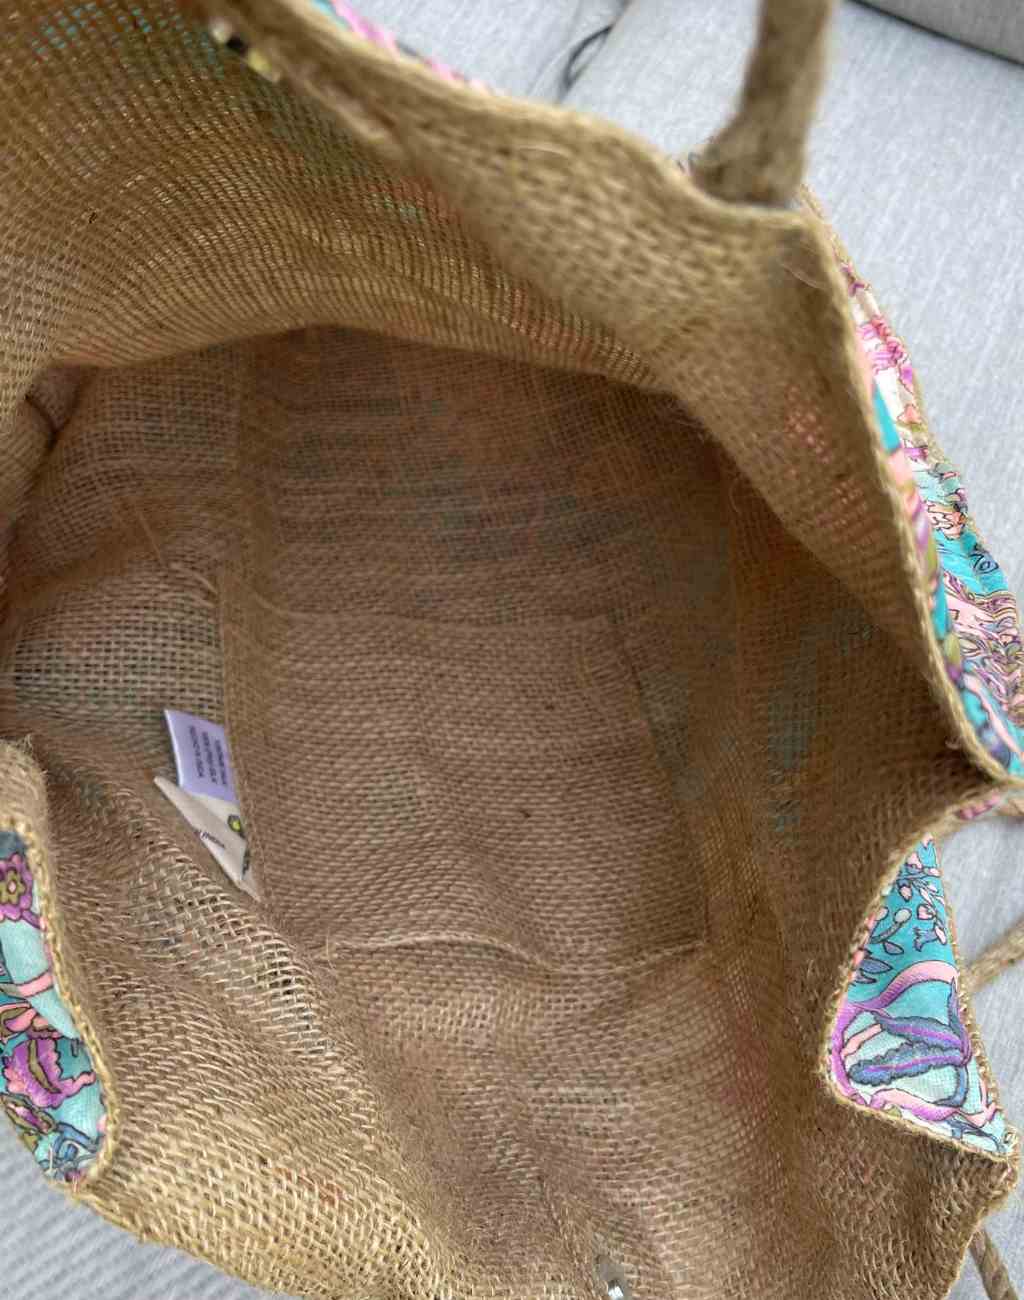 Vintage Silk Covered Jute Tote Bag in Blue, Pink, and Gold